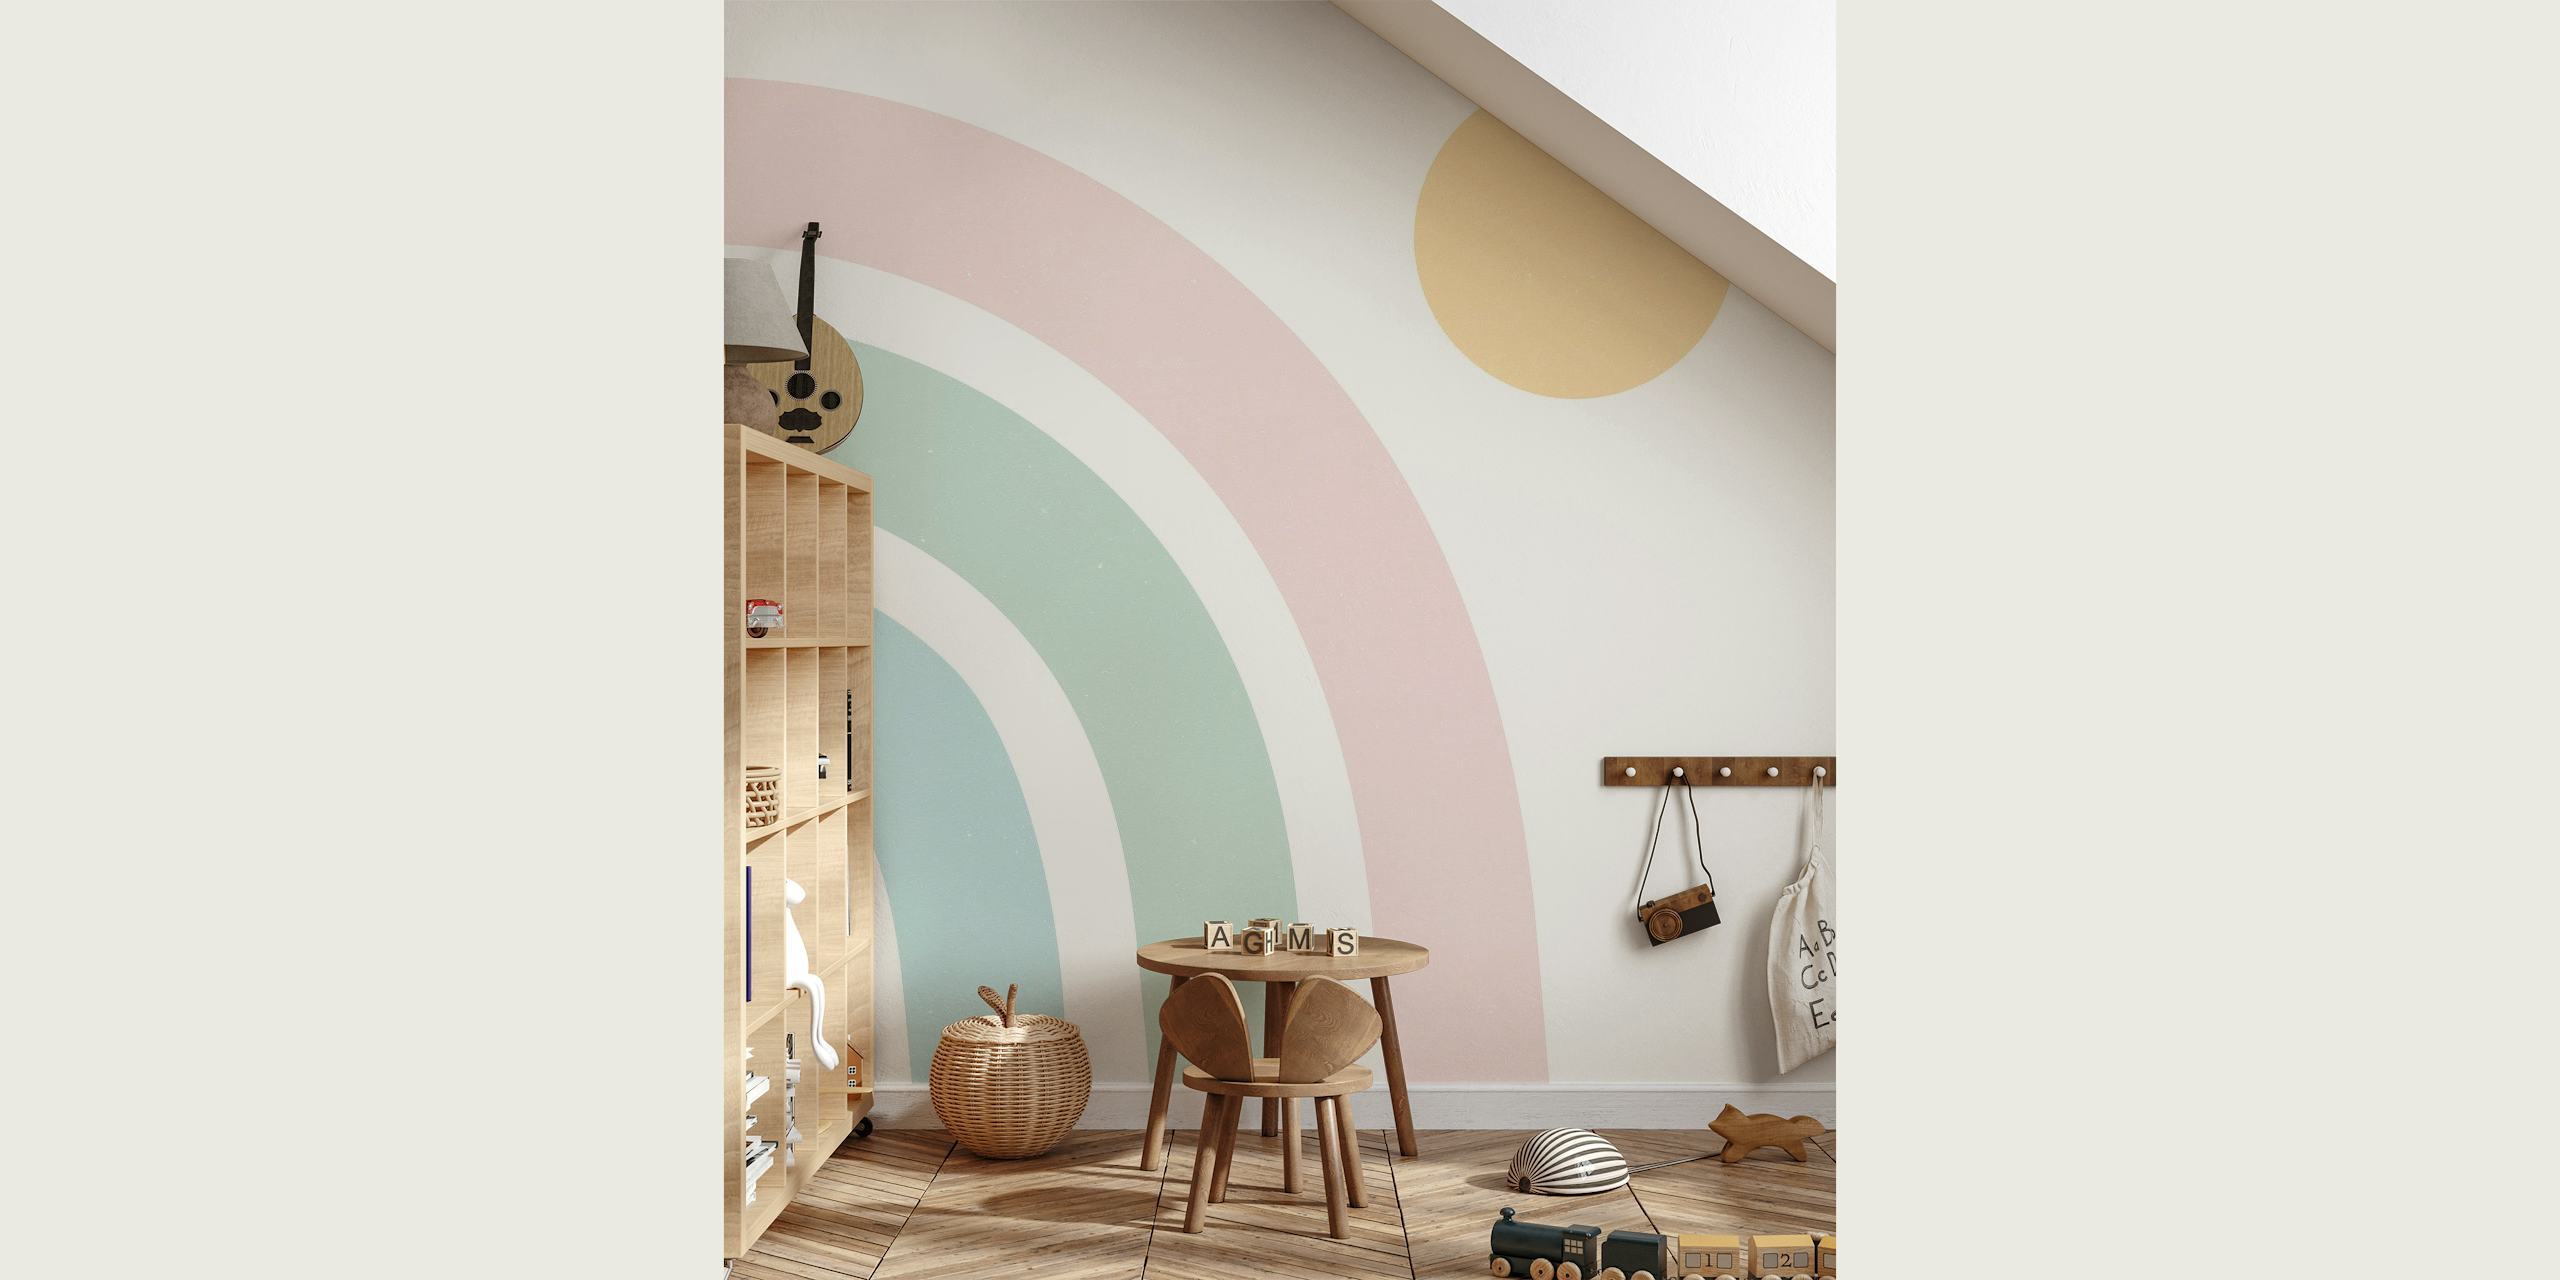 Colorful rainbow wall mural with arcing bands of pastel shades